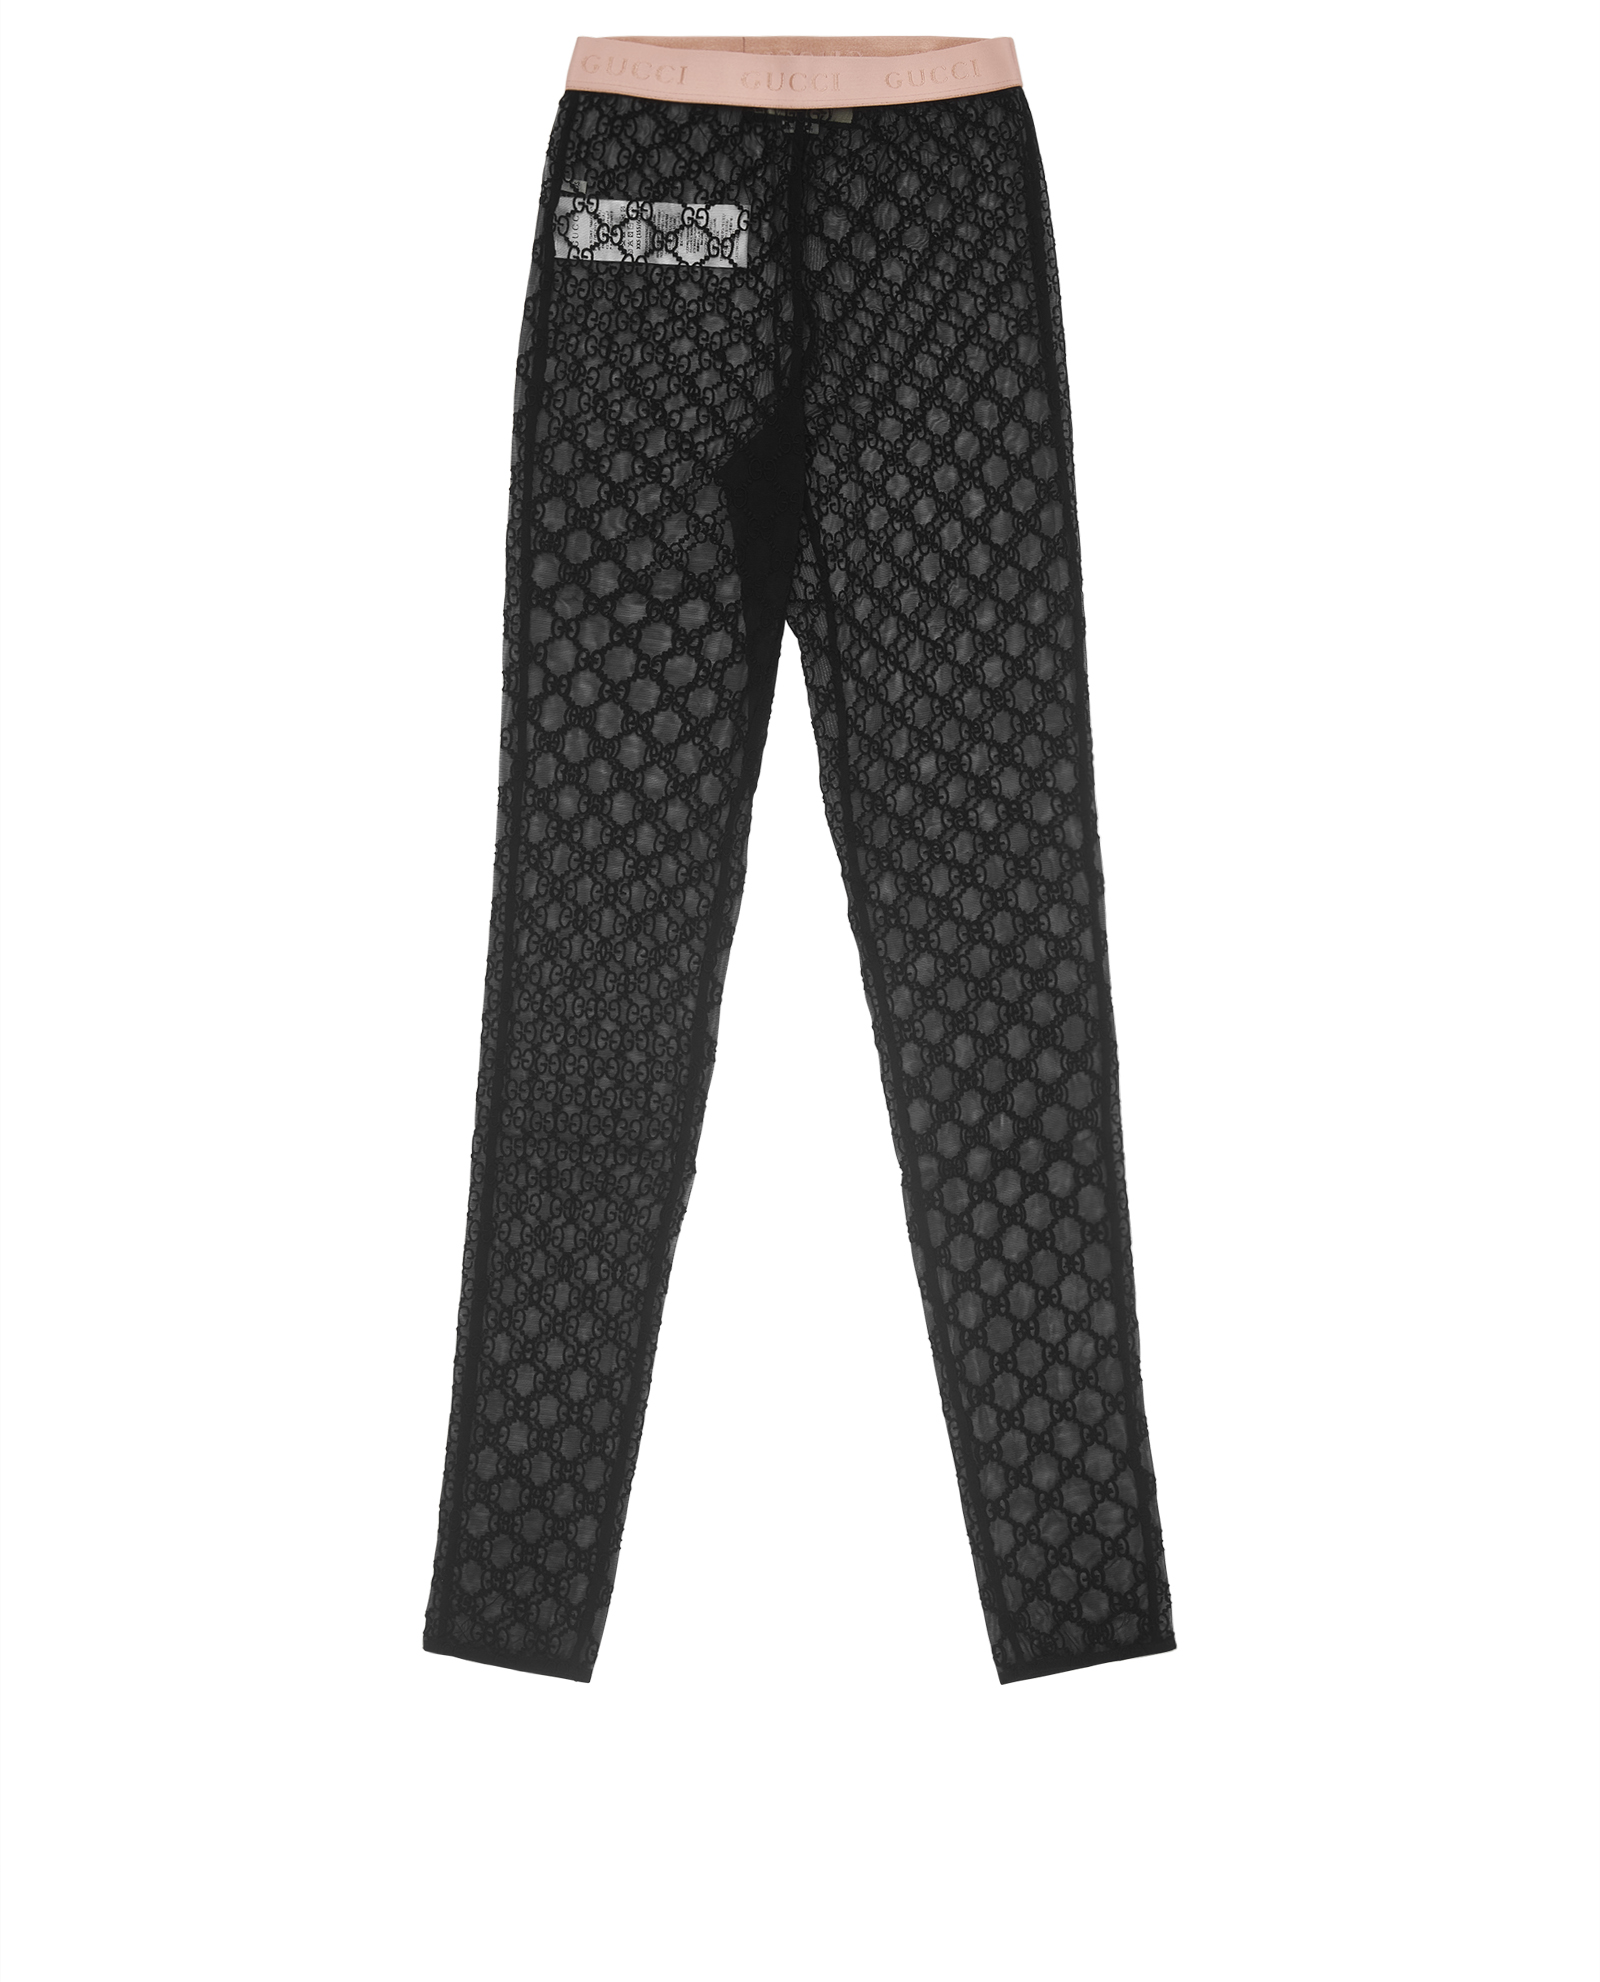 Gucci GG Embroidered Tulle Leggings, front view